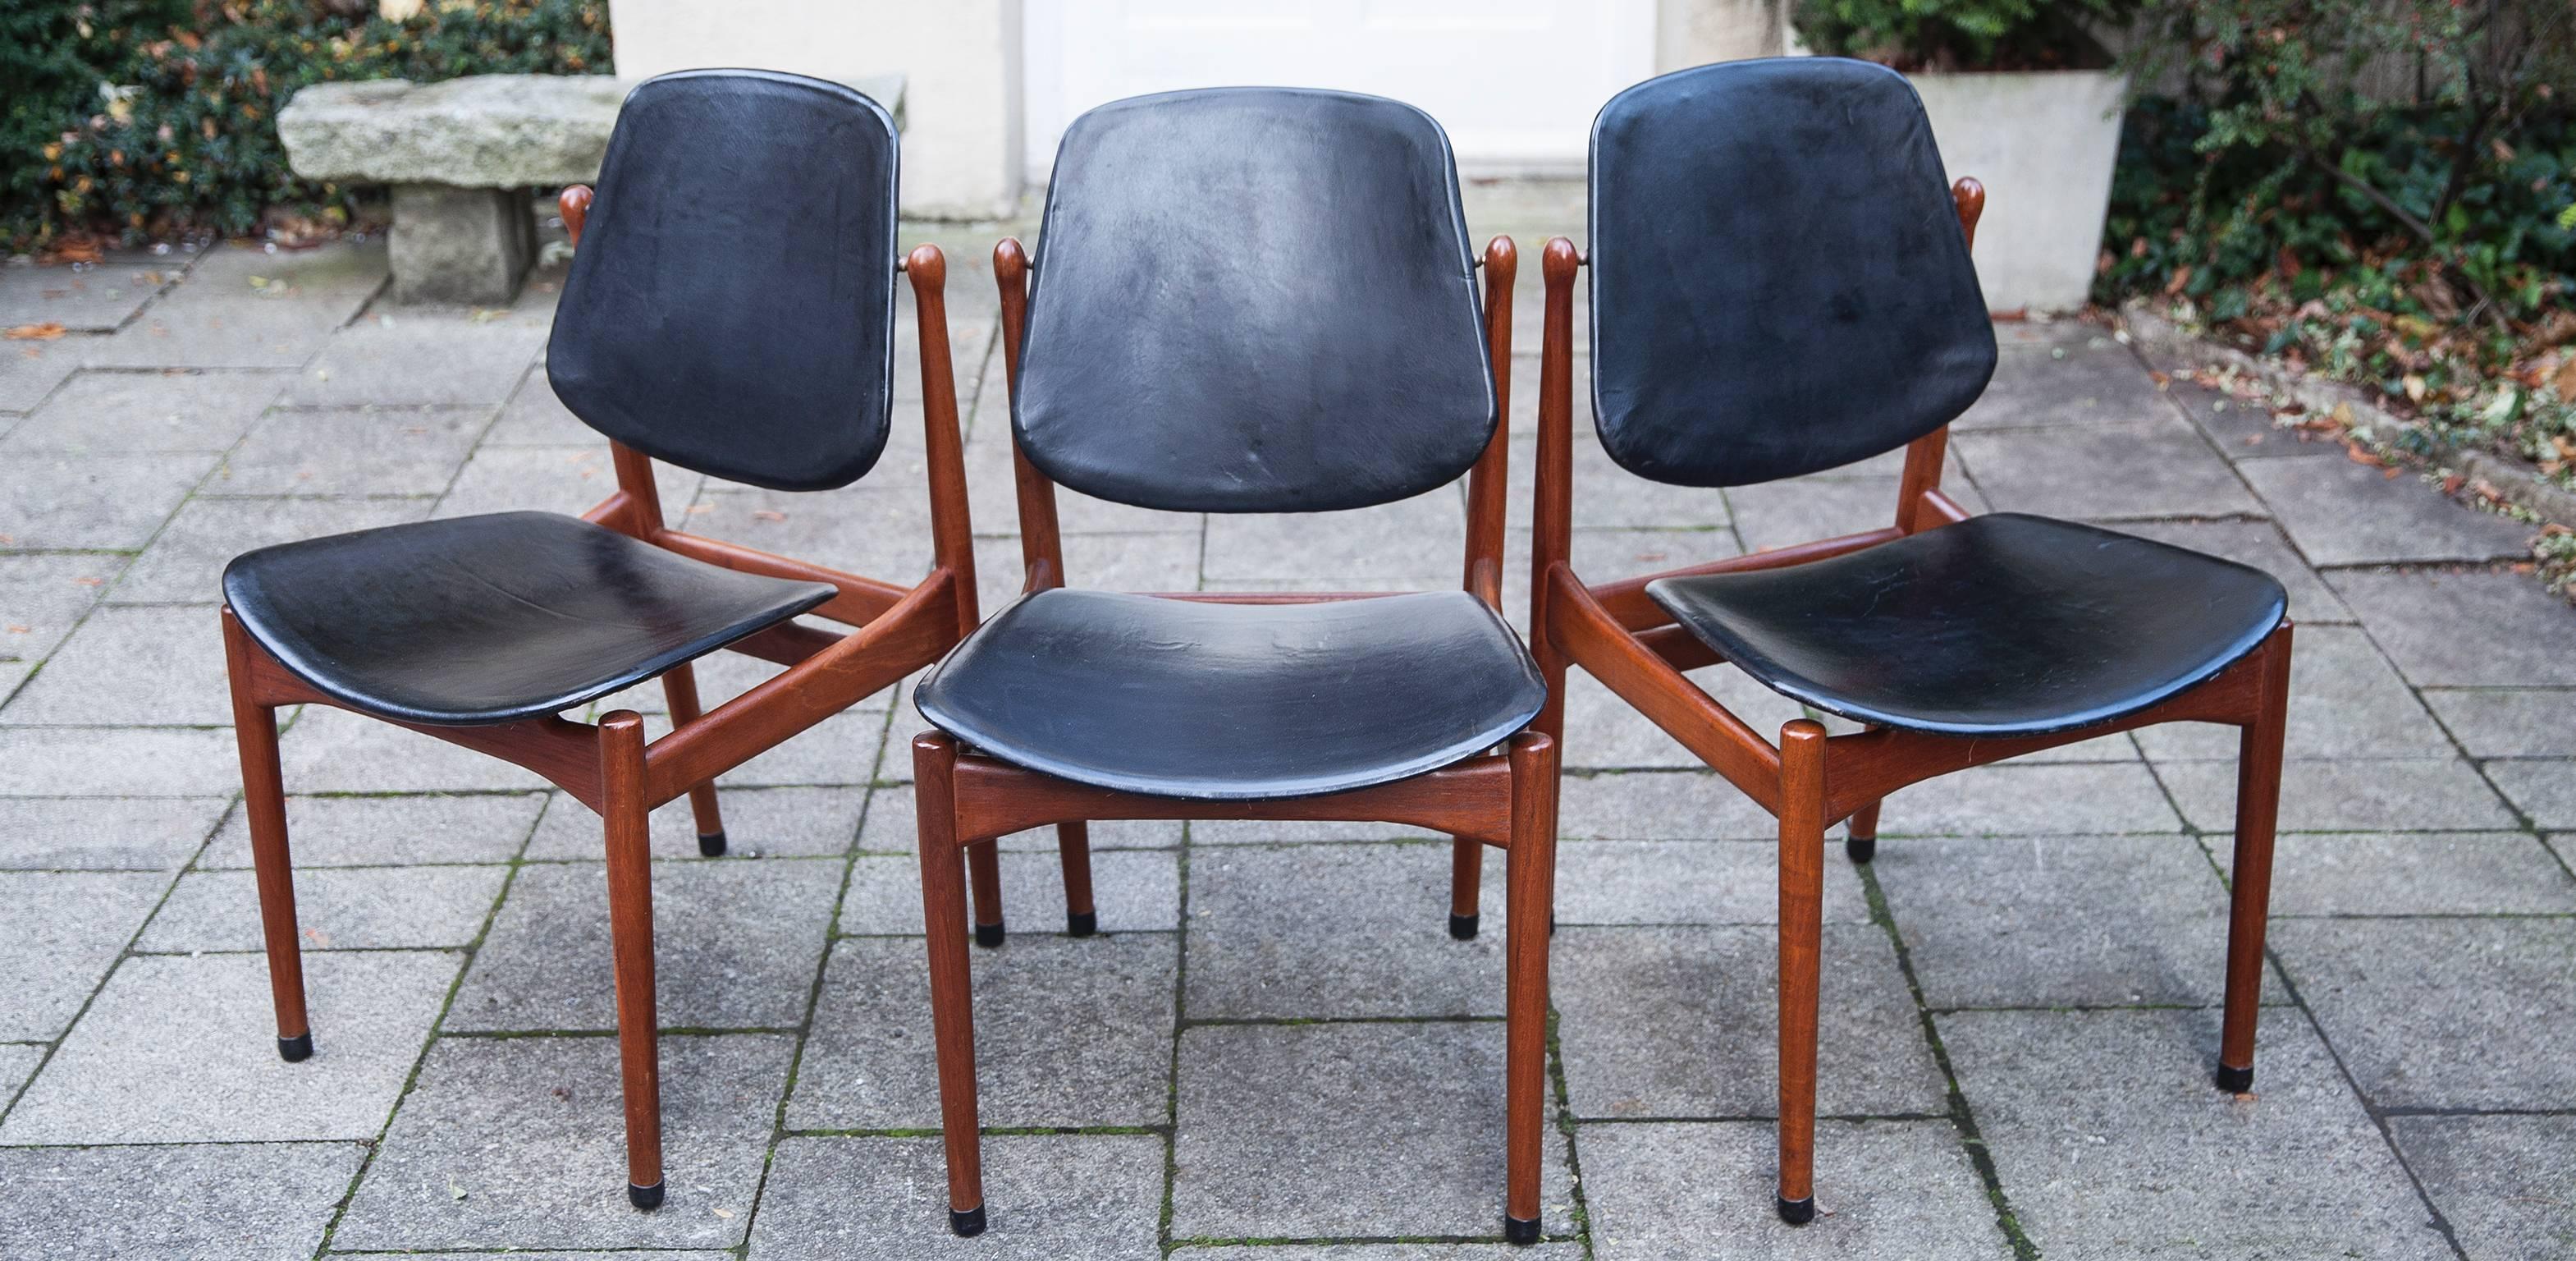 Arne Vodder Danish modern solid teak dining chairs made by France and Son of Denmark from 1957. Markers label with brass medallions and embossed insignia. The tilting black leather backs cradle the body for a very comfortable seating position.